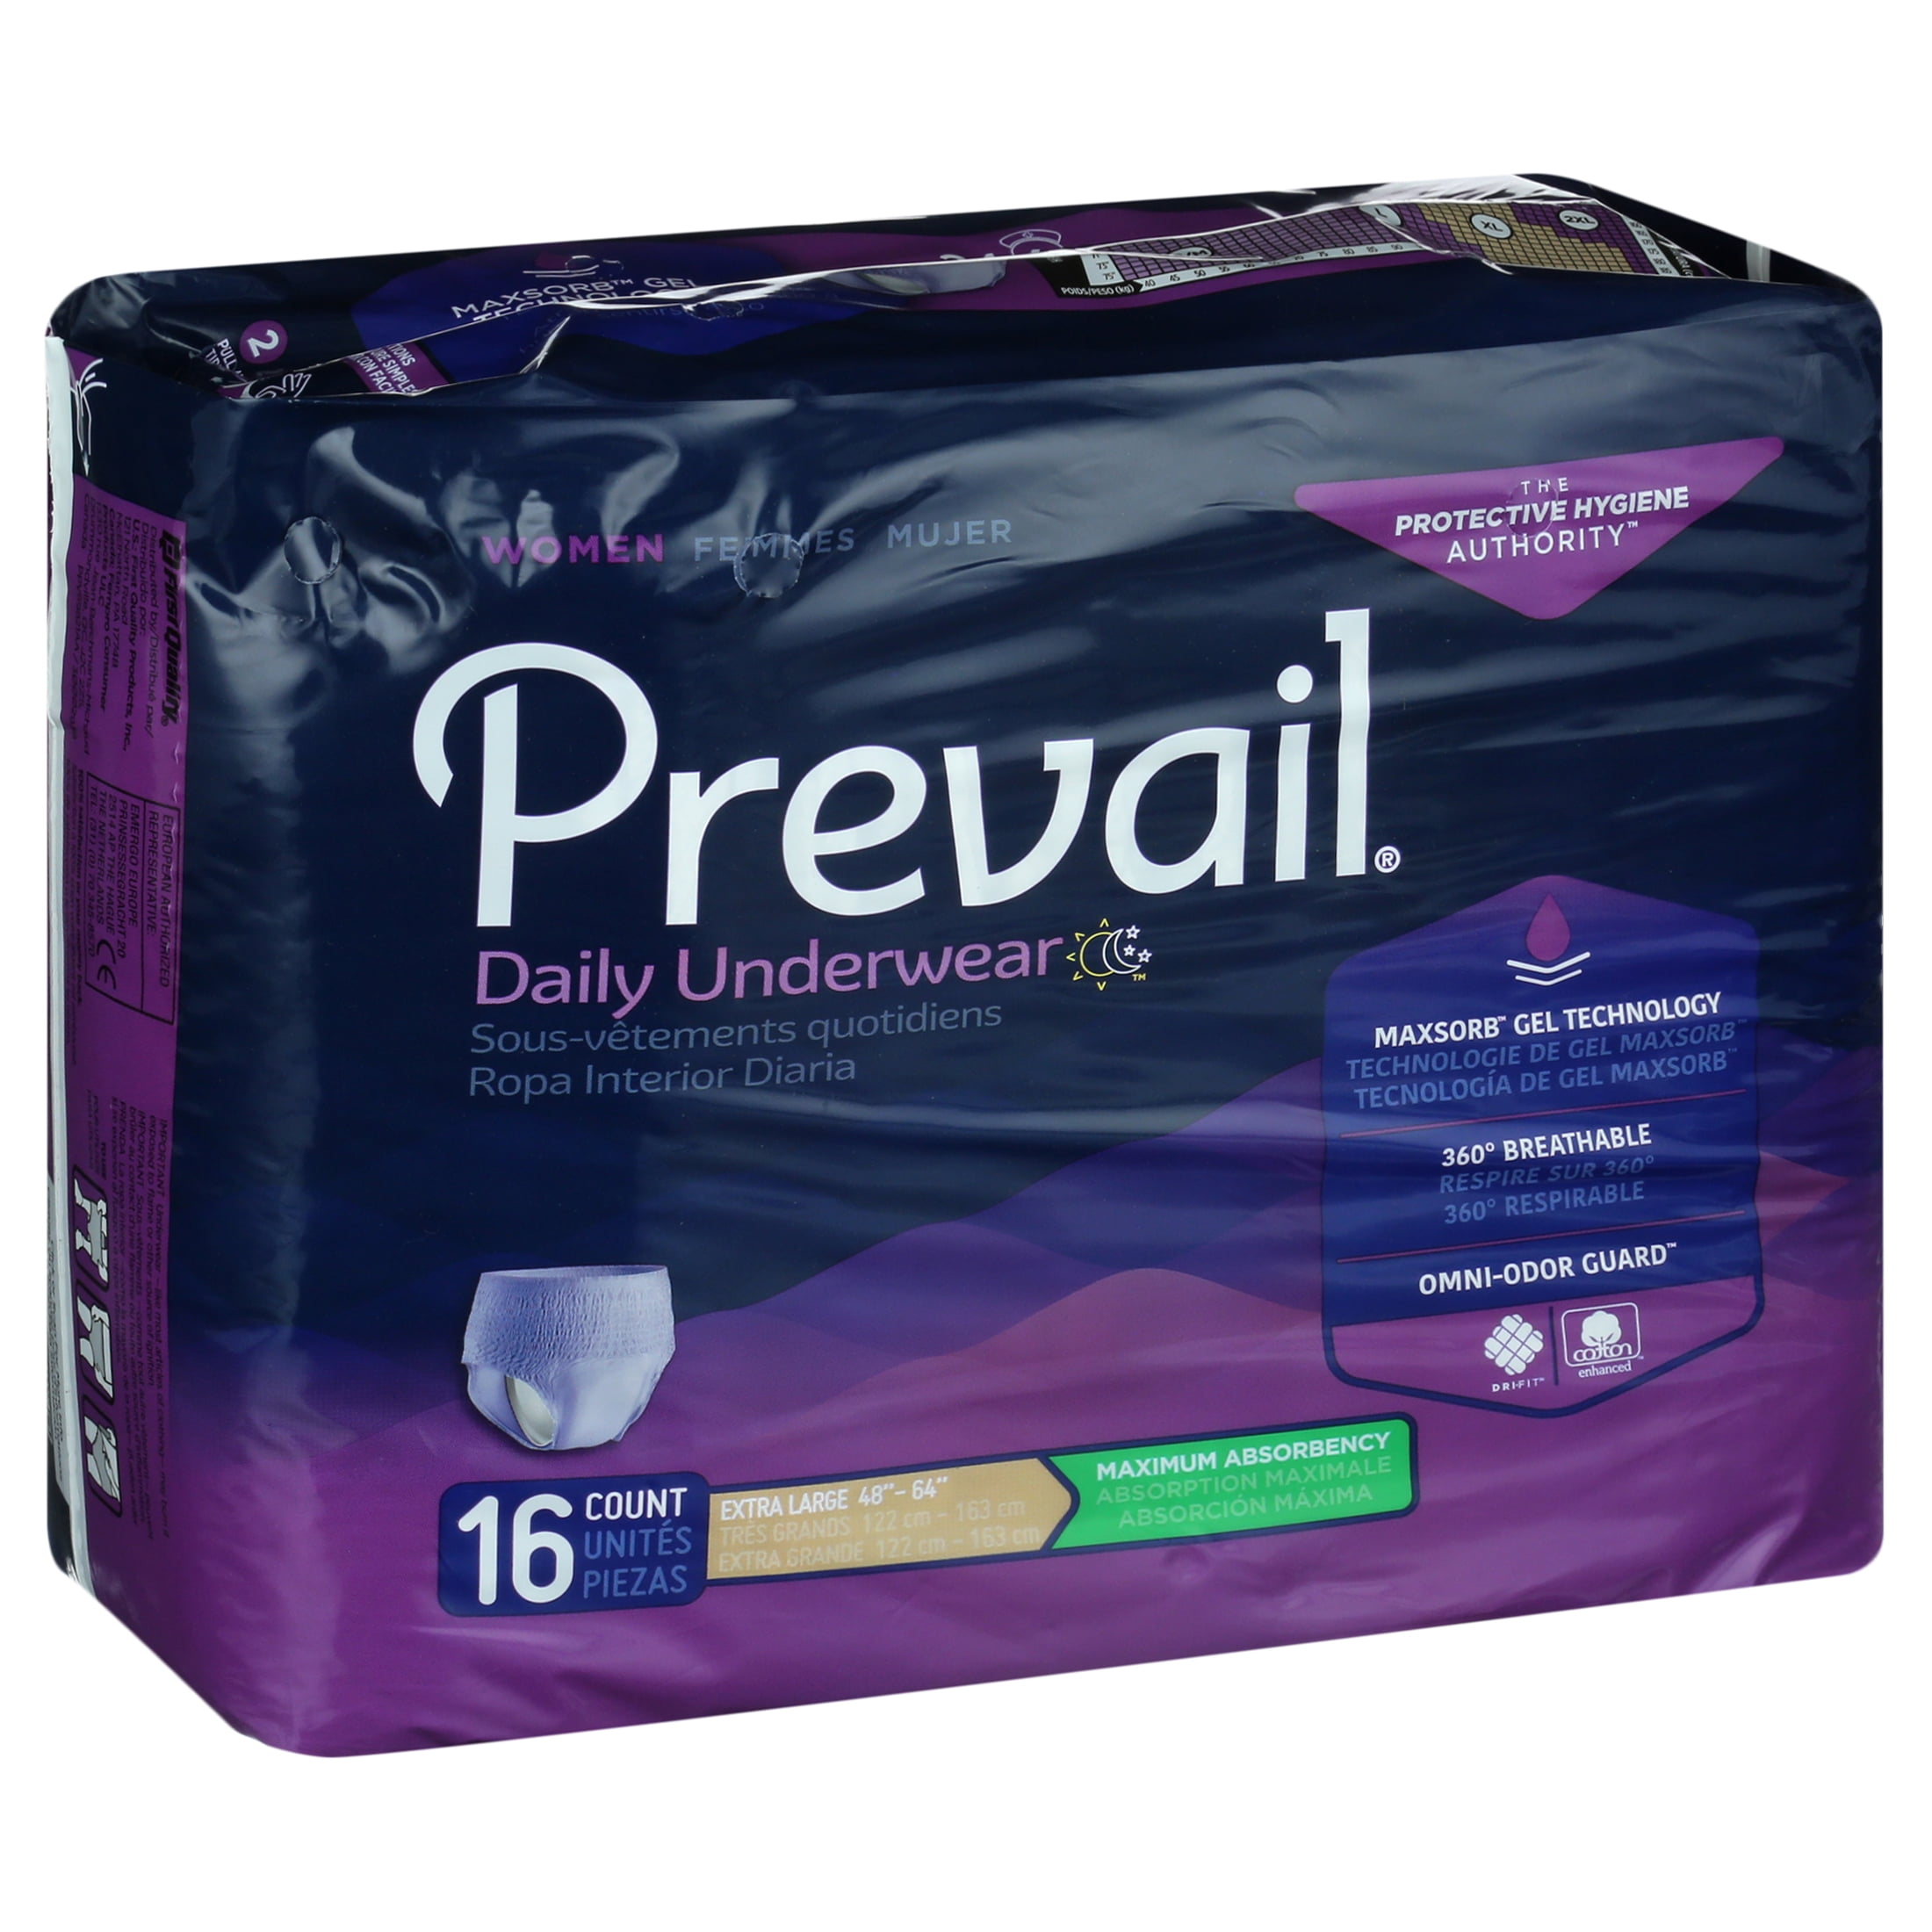 Prevail Daily Disposable Underwear Female Small, Maximum, 88 Ct